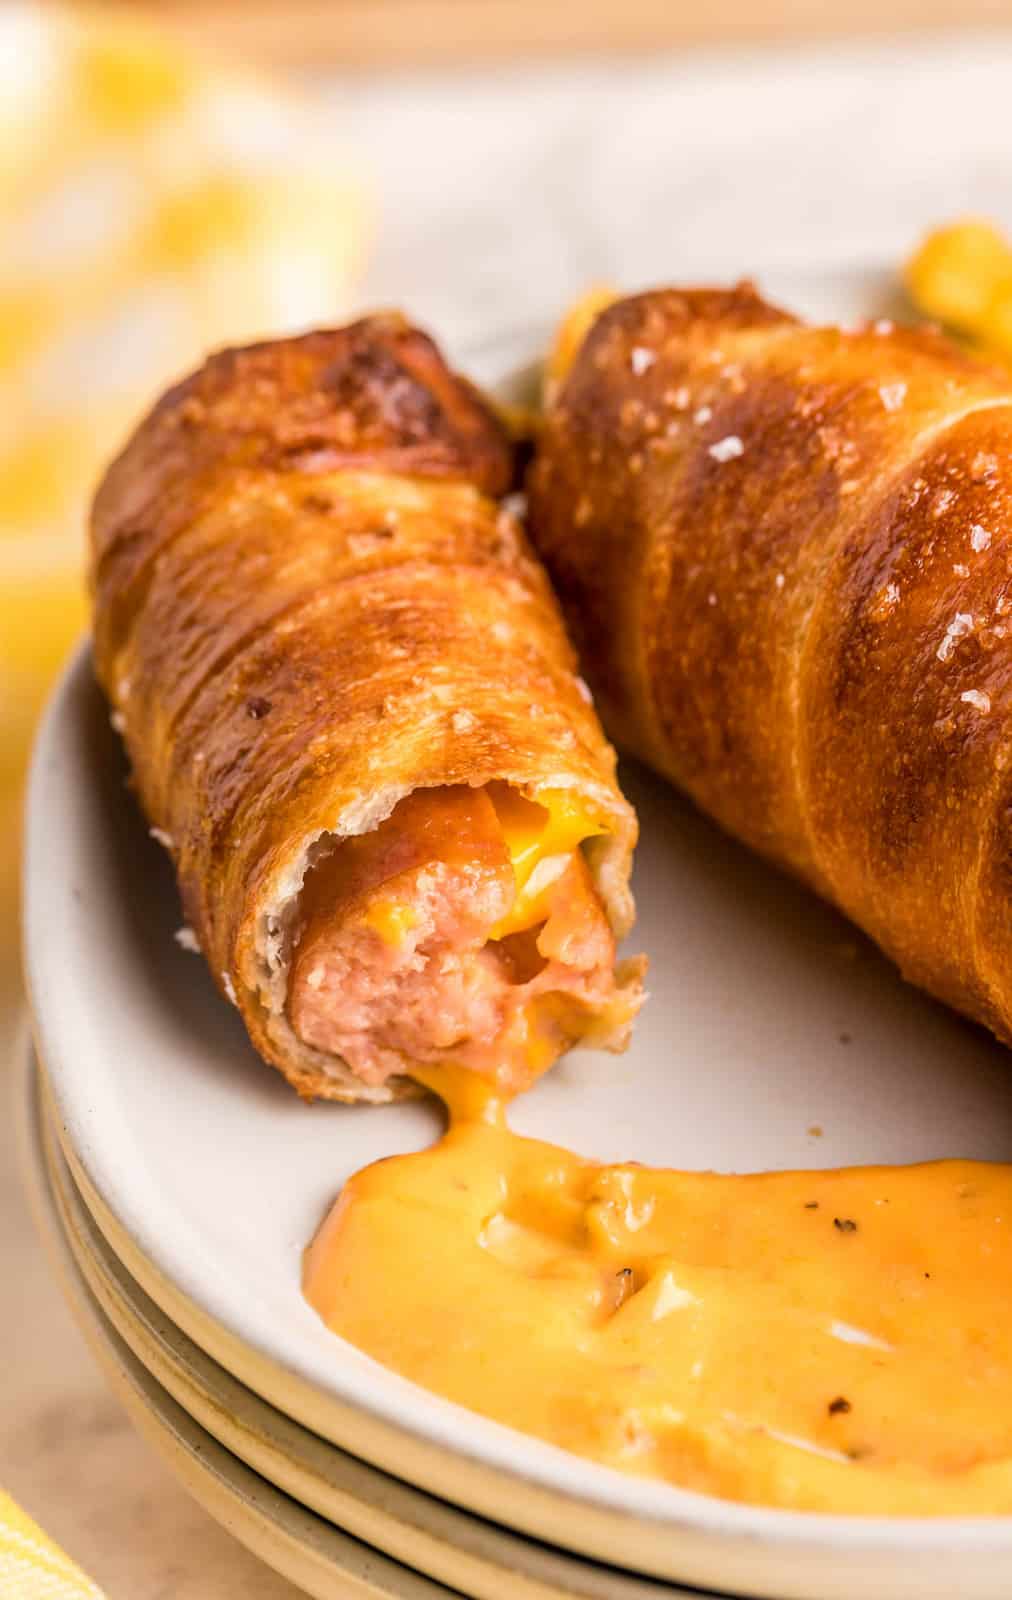 Bite taken out of one Air Fryer Pretzel dog on plate with nacho cheese sauce.